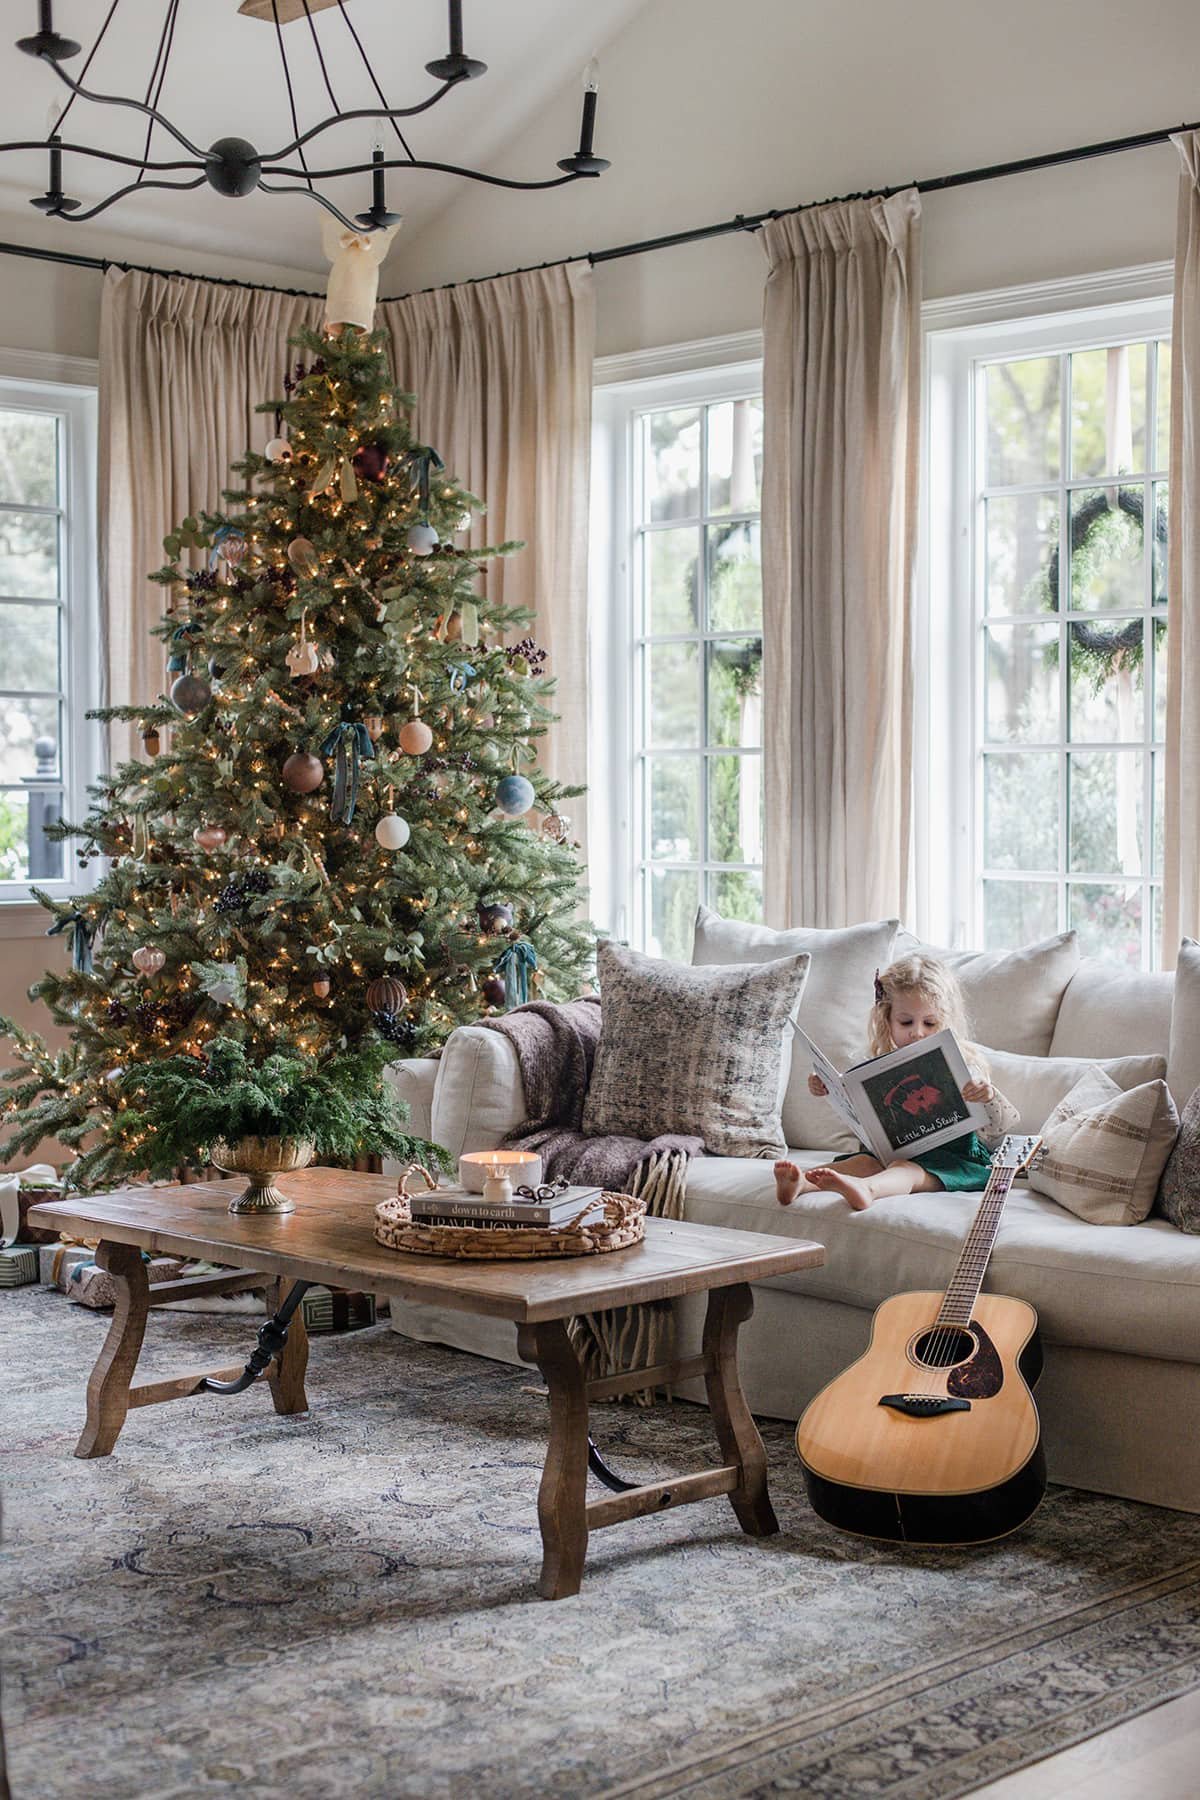 Christmas tree decorating styles and ideas. How to decorate your Christmas tree. Fairy twinkle lights. Icicle ornaments. Tinsel Christmas tree. Sparse Charlie Brown Christmas trees. | Nadine Stay | Jenna Sue Design